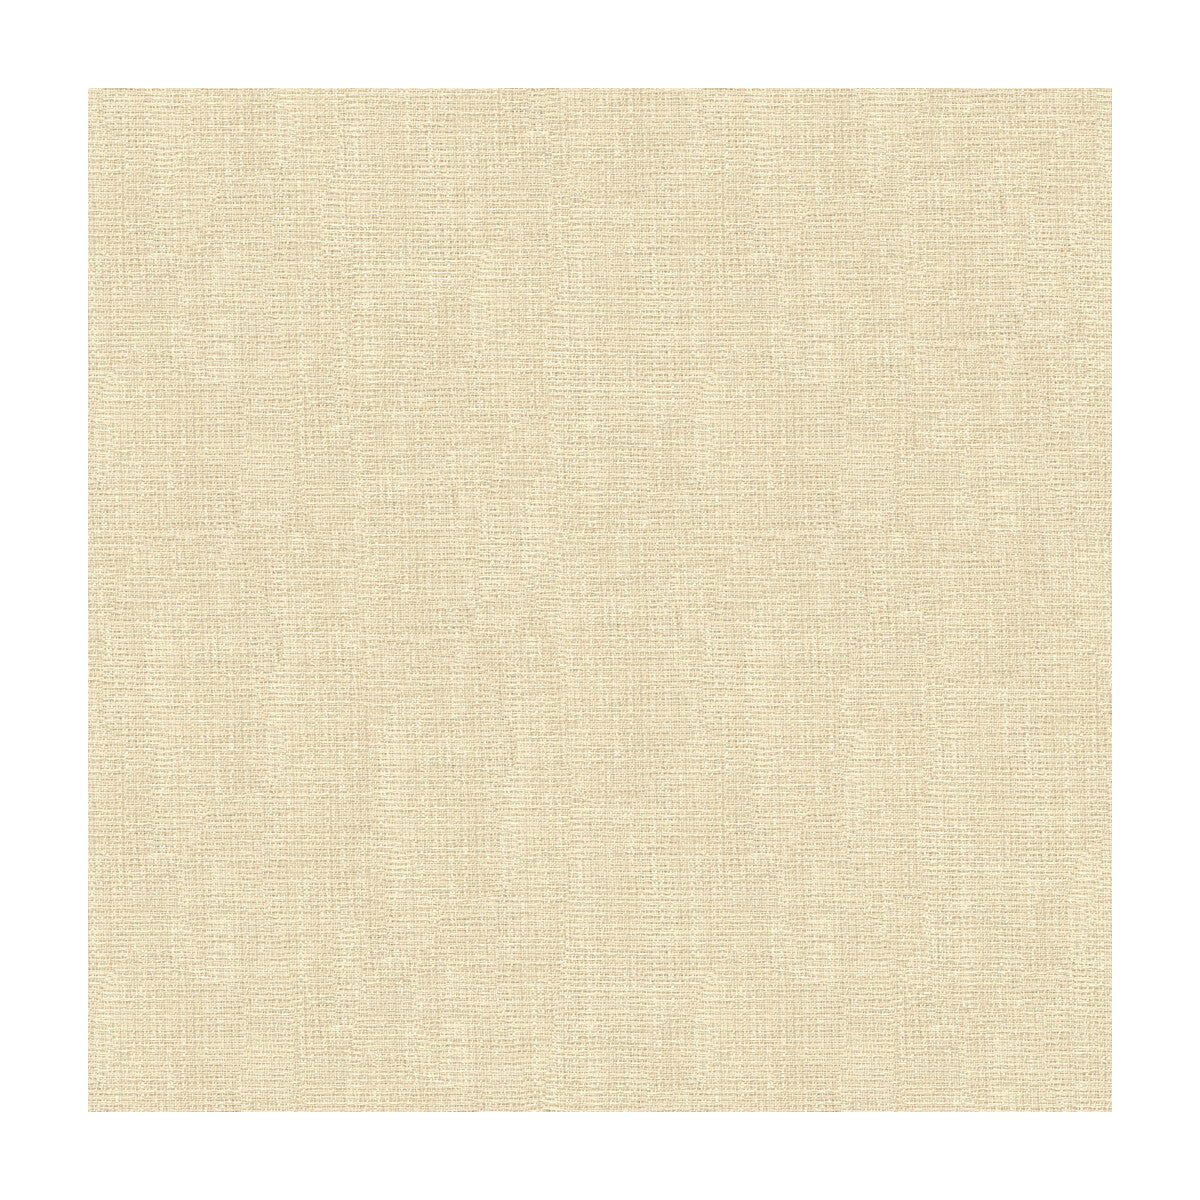 Kravet Contract fabric in 4161-1 color - pattern 4161.1.0 - by Kravet Contract